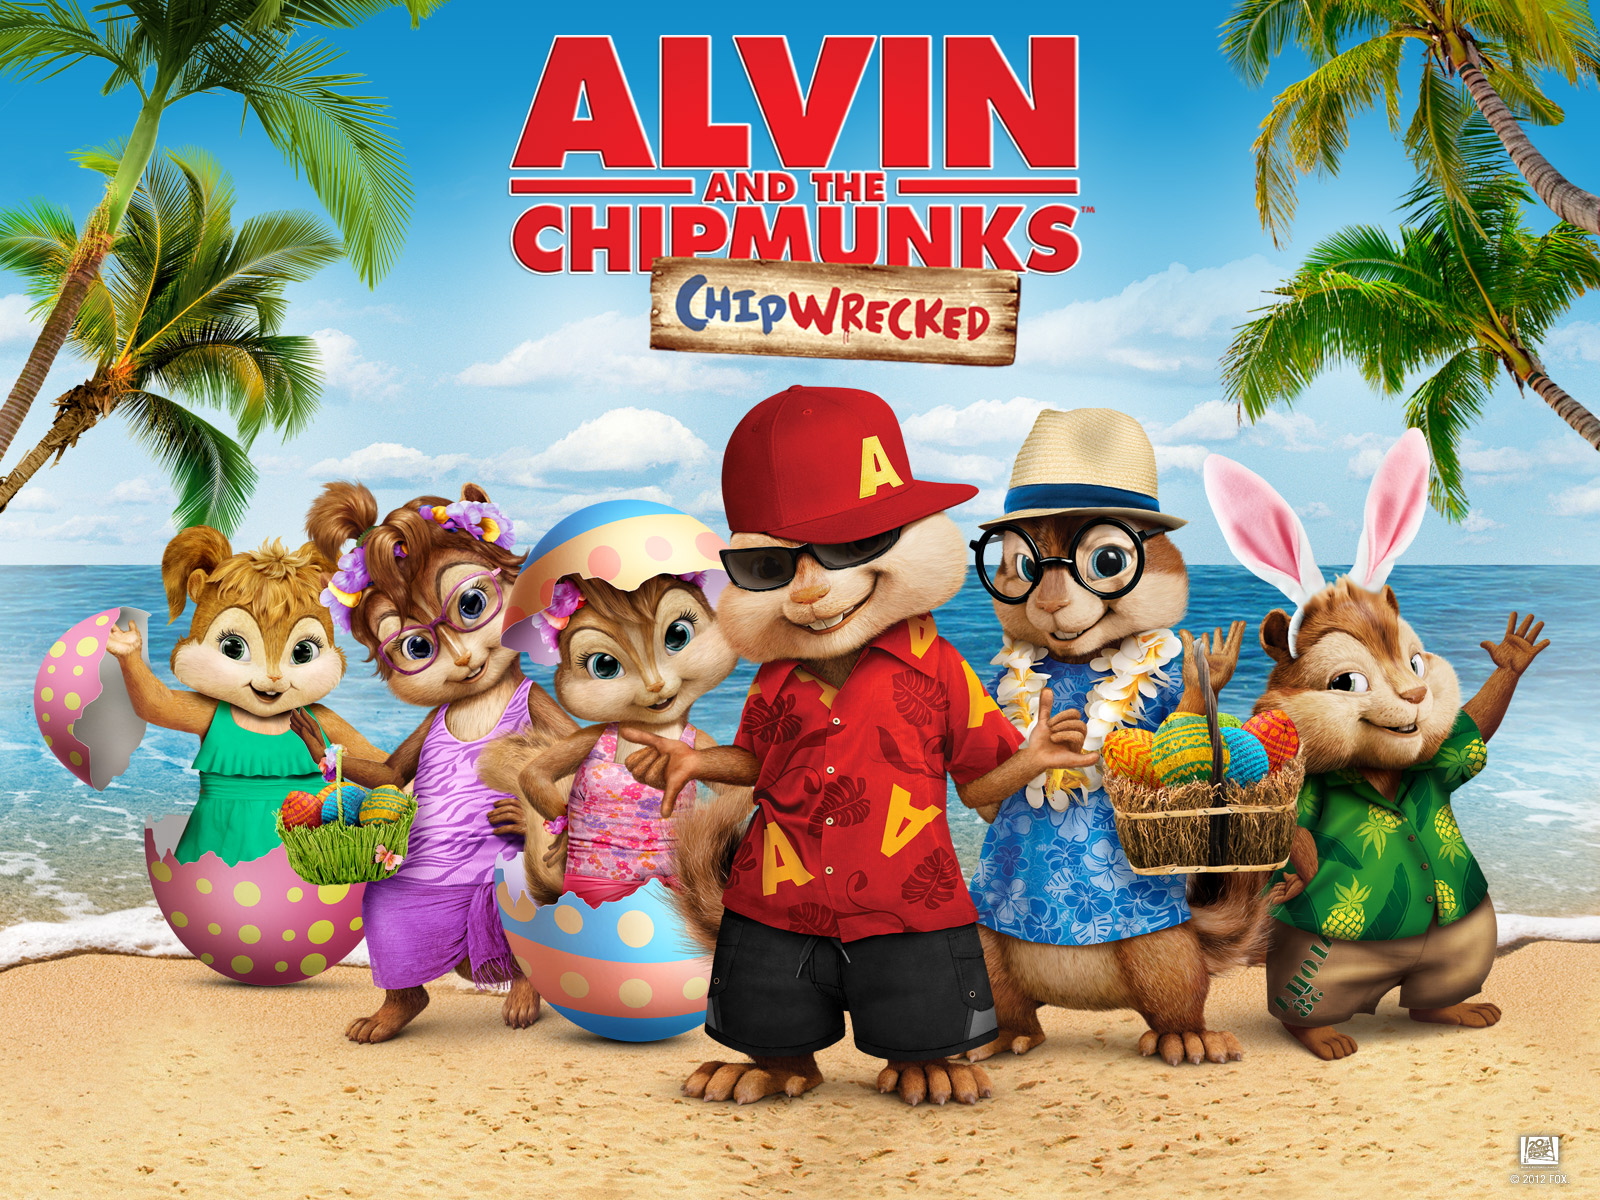 HQ Alvin And The Chipmunks: Chipwrecked Wallpapers | File 805.47Kb